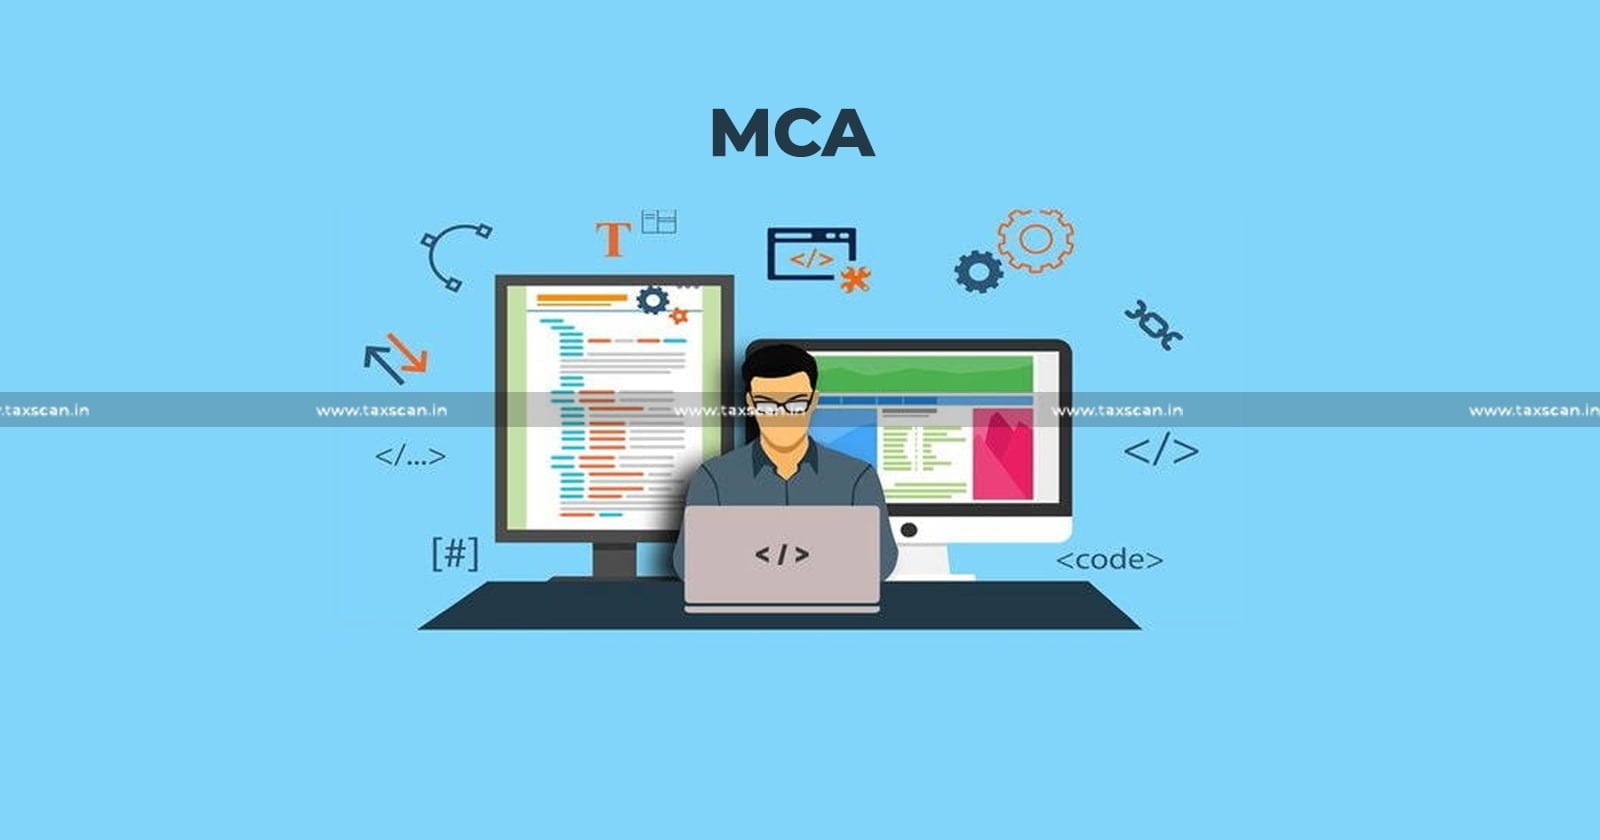 MCA imposes Penalty - Penalty - Company Omitting to Print E-mail ID and Phone Number - MCA - Print E-mail ID and Phone Number - E-mail ID - E-mail - Phone Number - Form GNL-1 - Taxscan